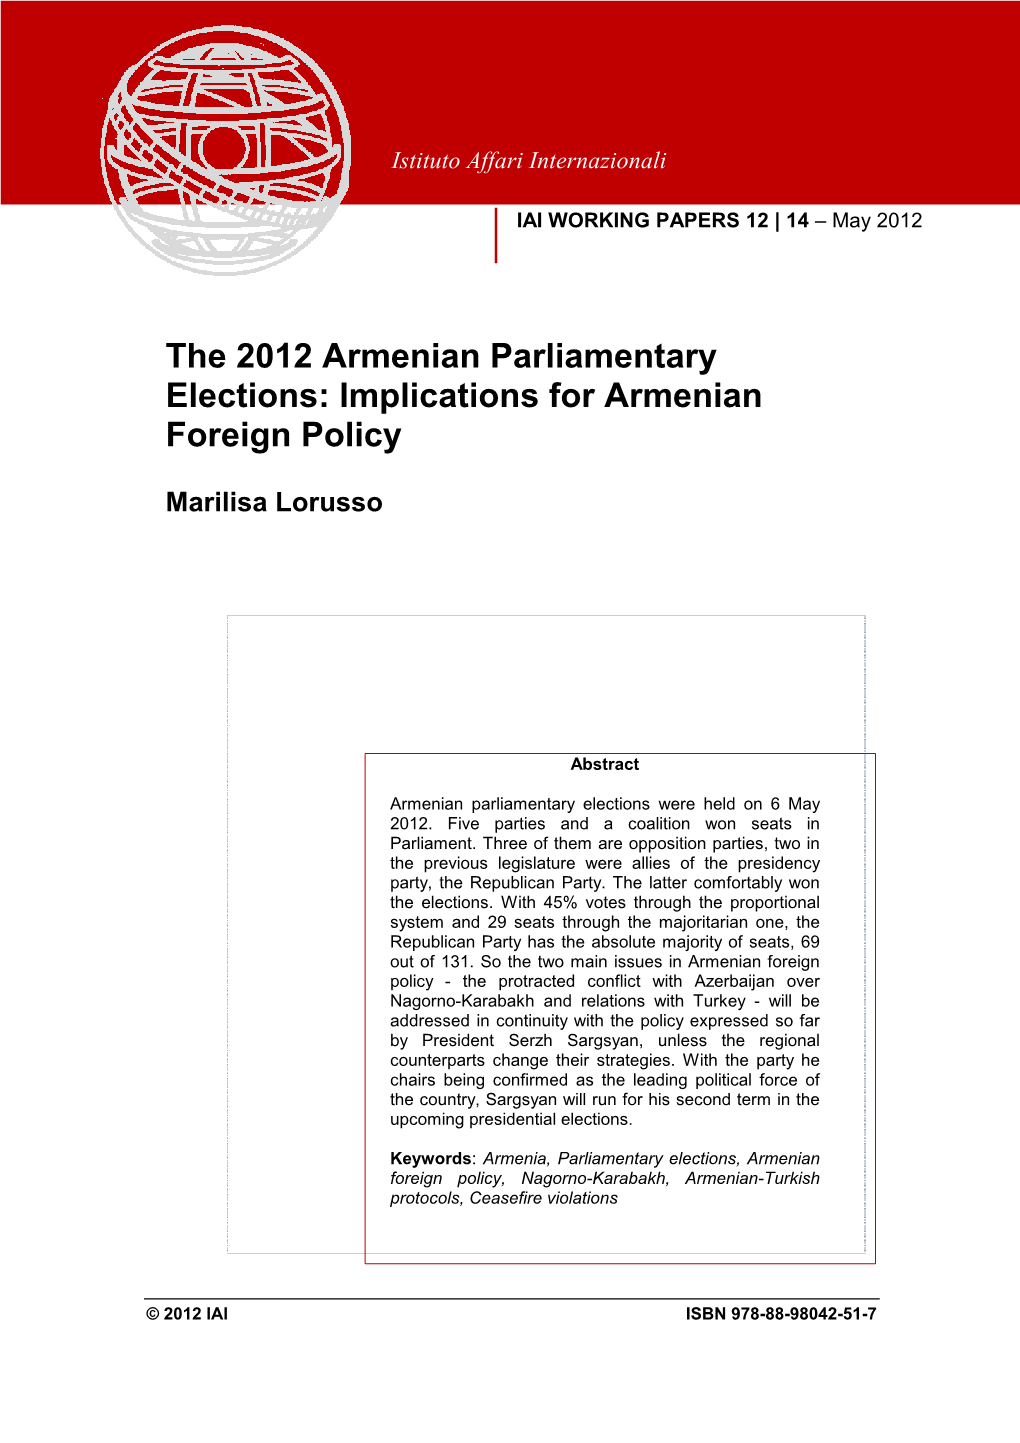 The 2012 Armenian Parliamentary Elections: Implications for Armenian Foreign Policy